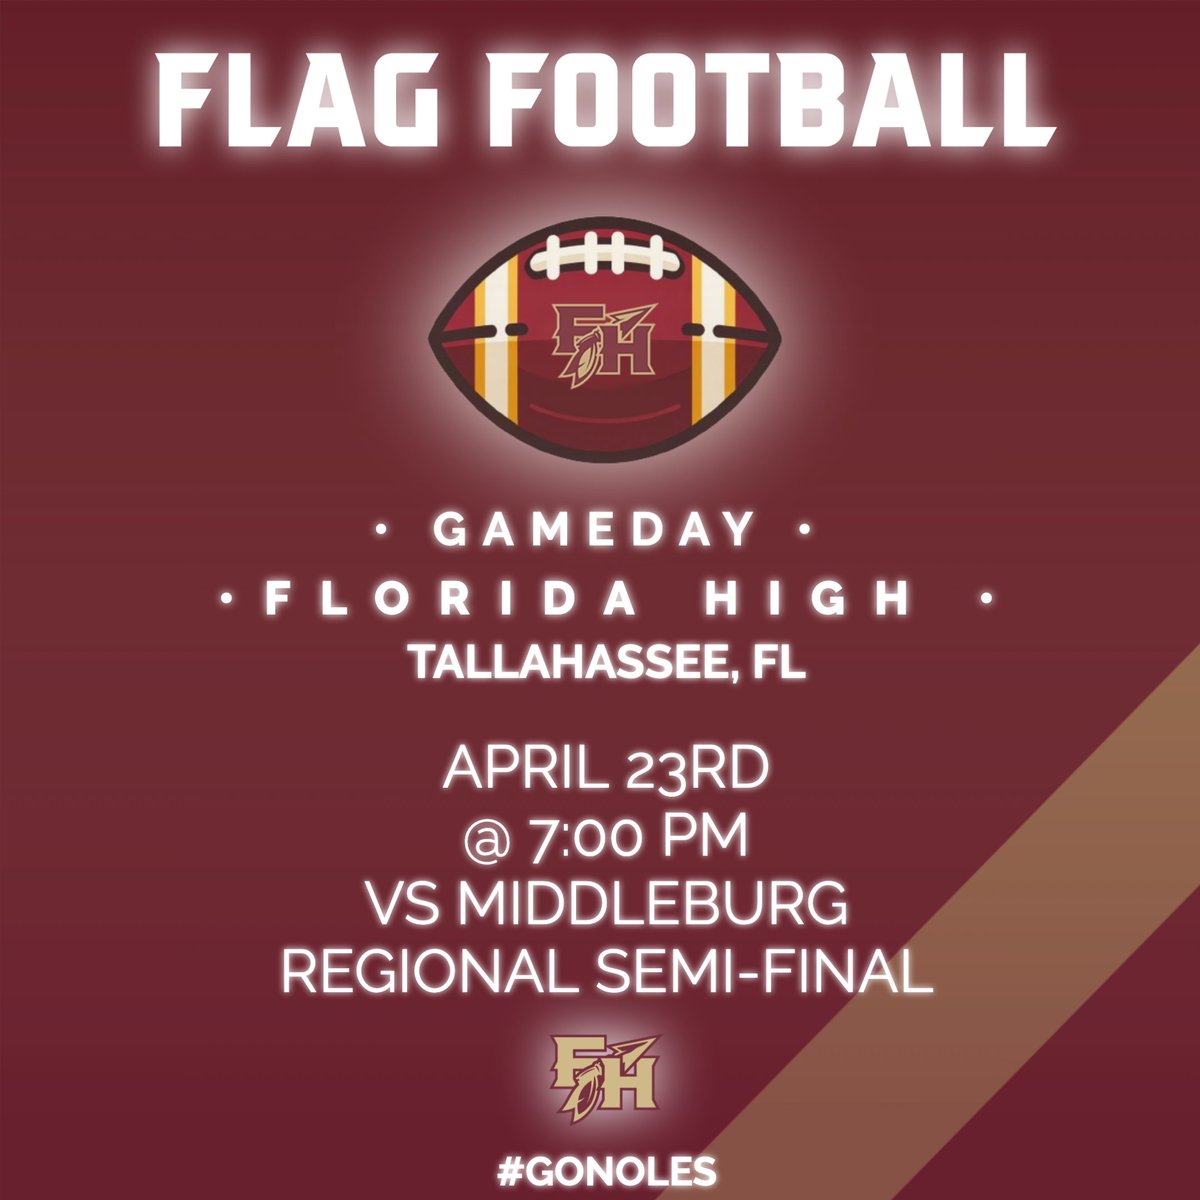 • Gameday Alert • Attention, Noles! Tomorrow, our Flag Football team takes on Middleburg in the Regional Semi-Final. Come out and support this stellar squad! Time: 7:00 Date: April 23rd (Tomorrow) Tickets: $9 Link: gofan.co/event/1502199?…